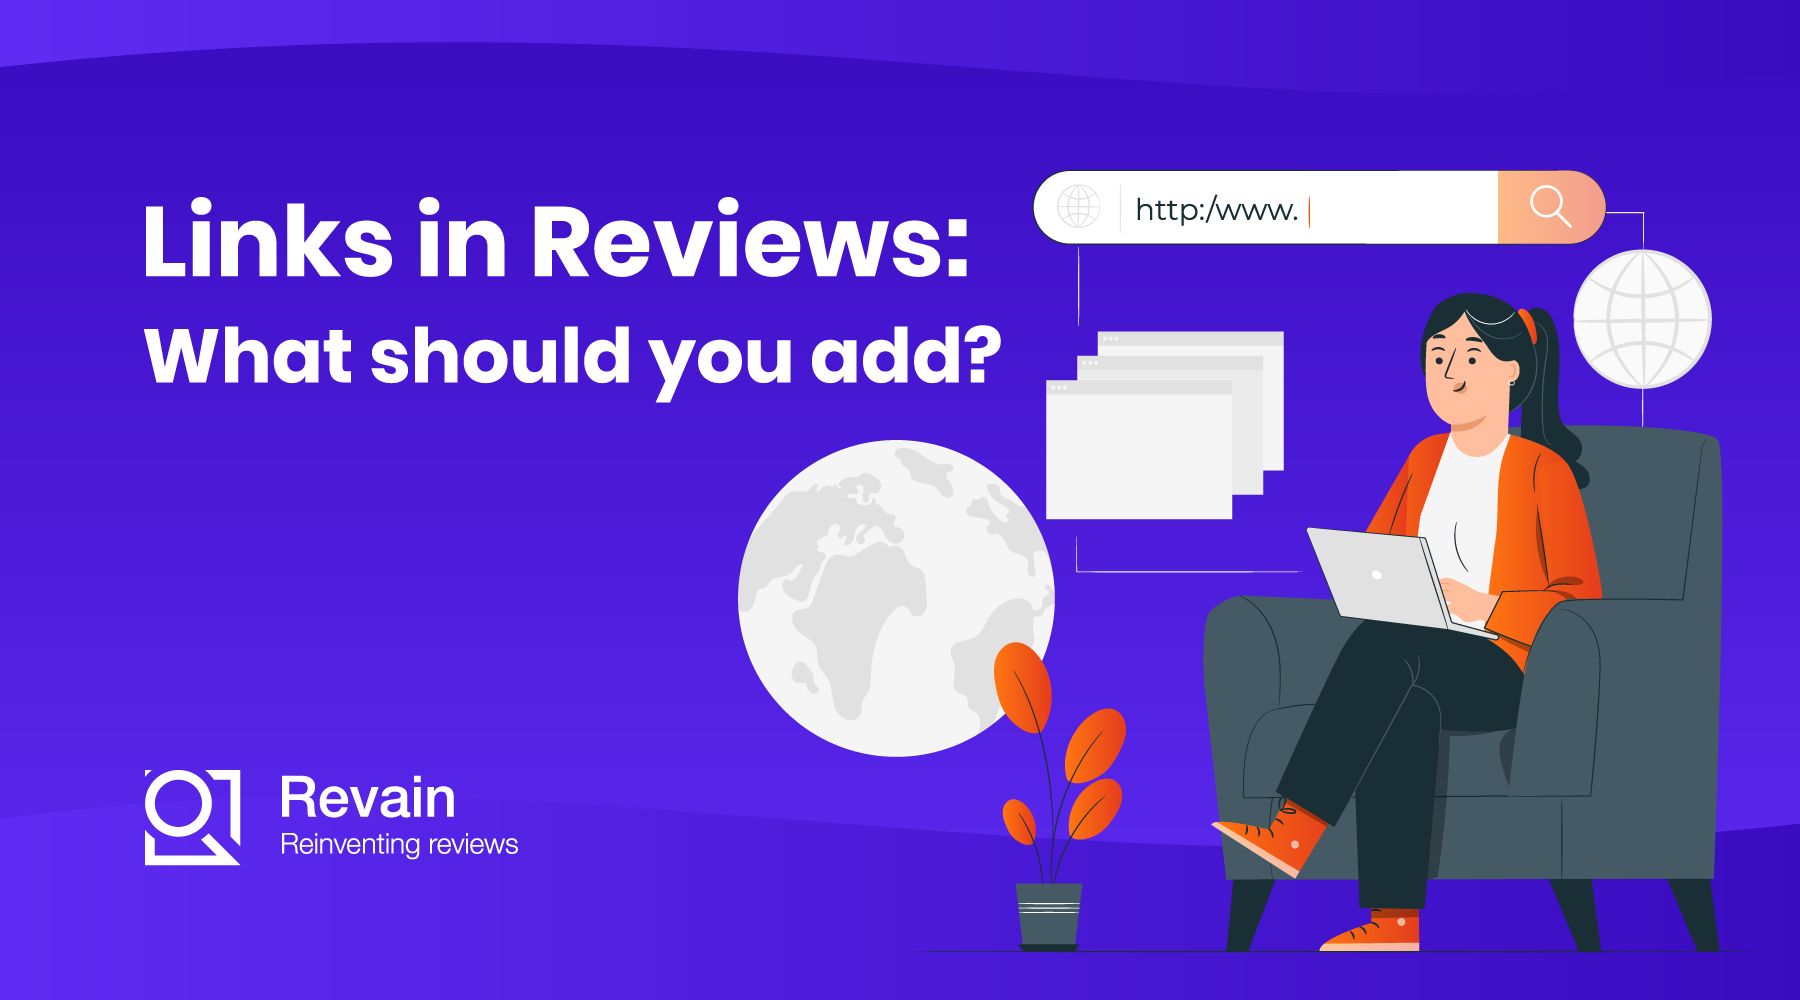 Links in reviews: what should you add?